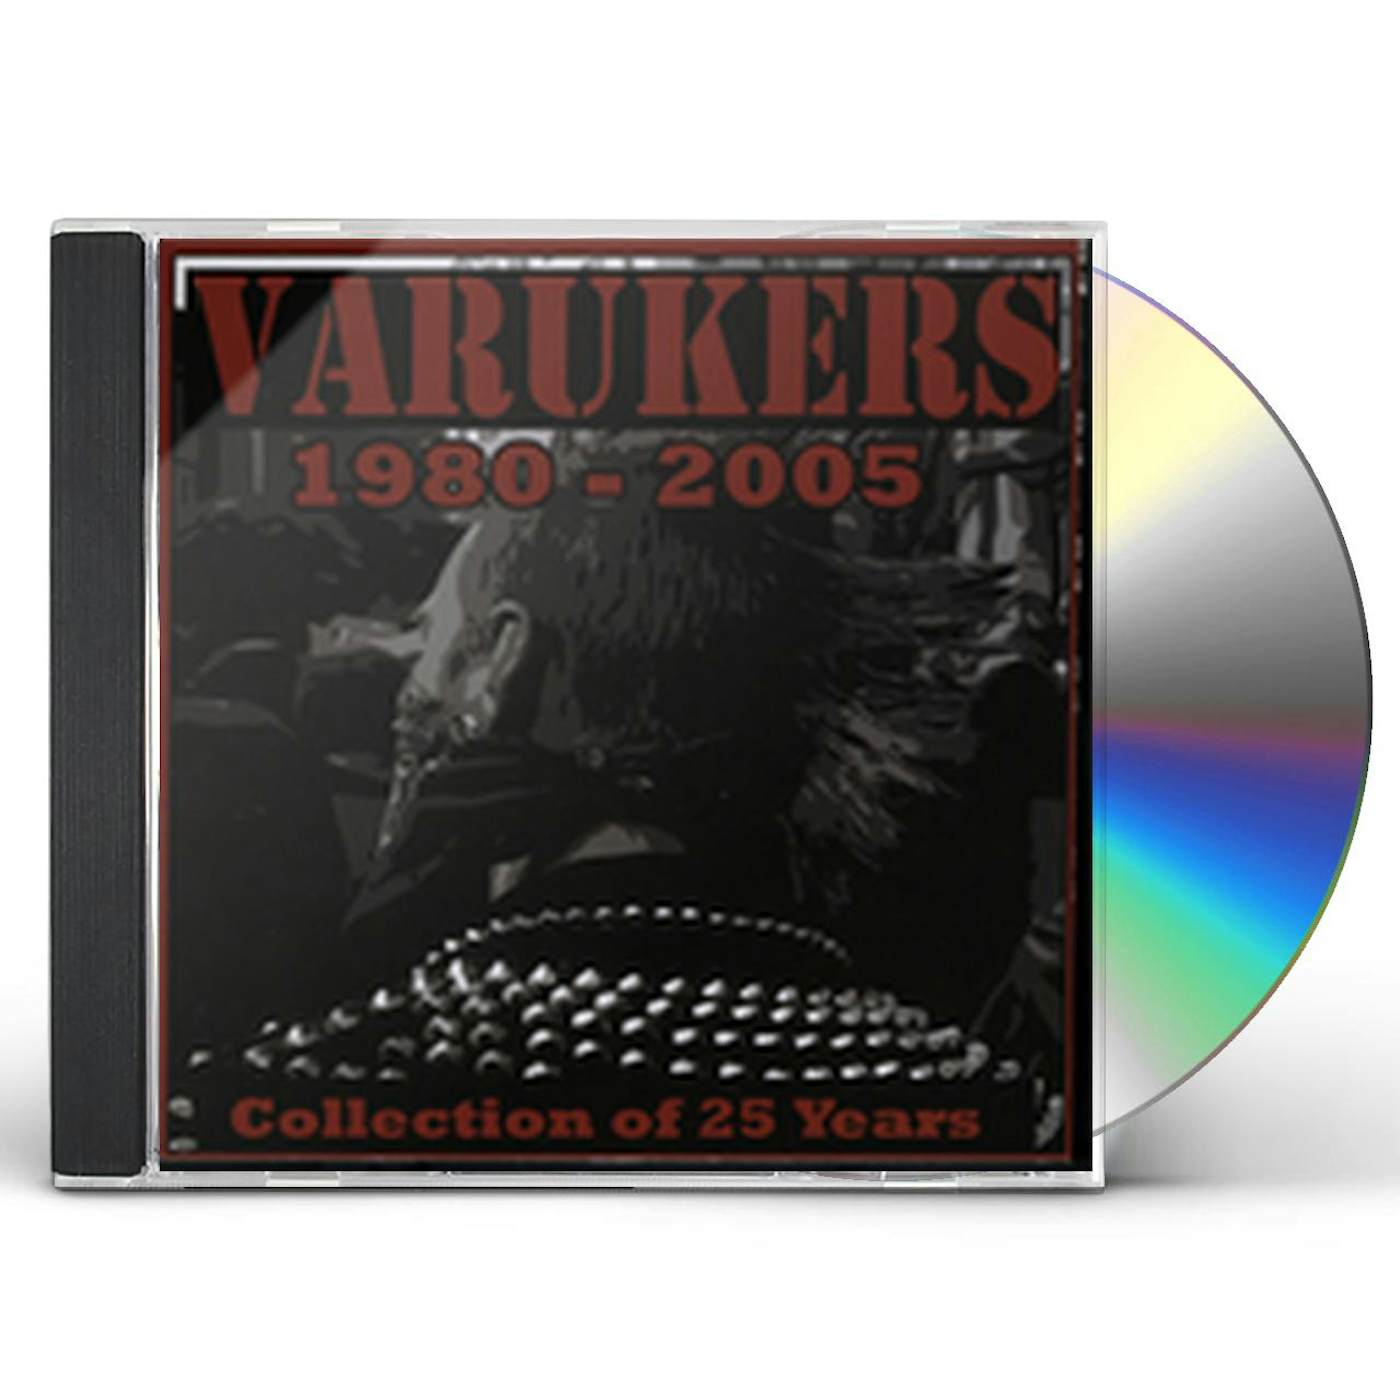 The Varukers 1980-2005 COLLECTION OF 25 YEARS CD